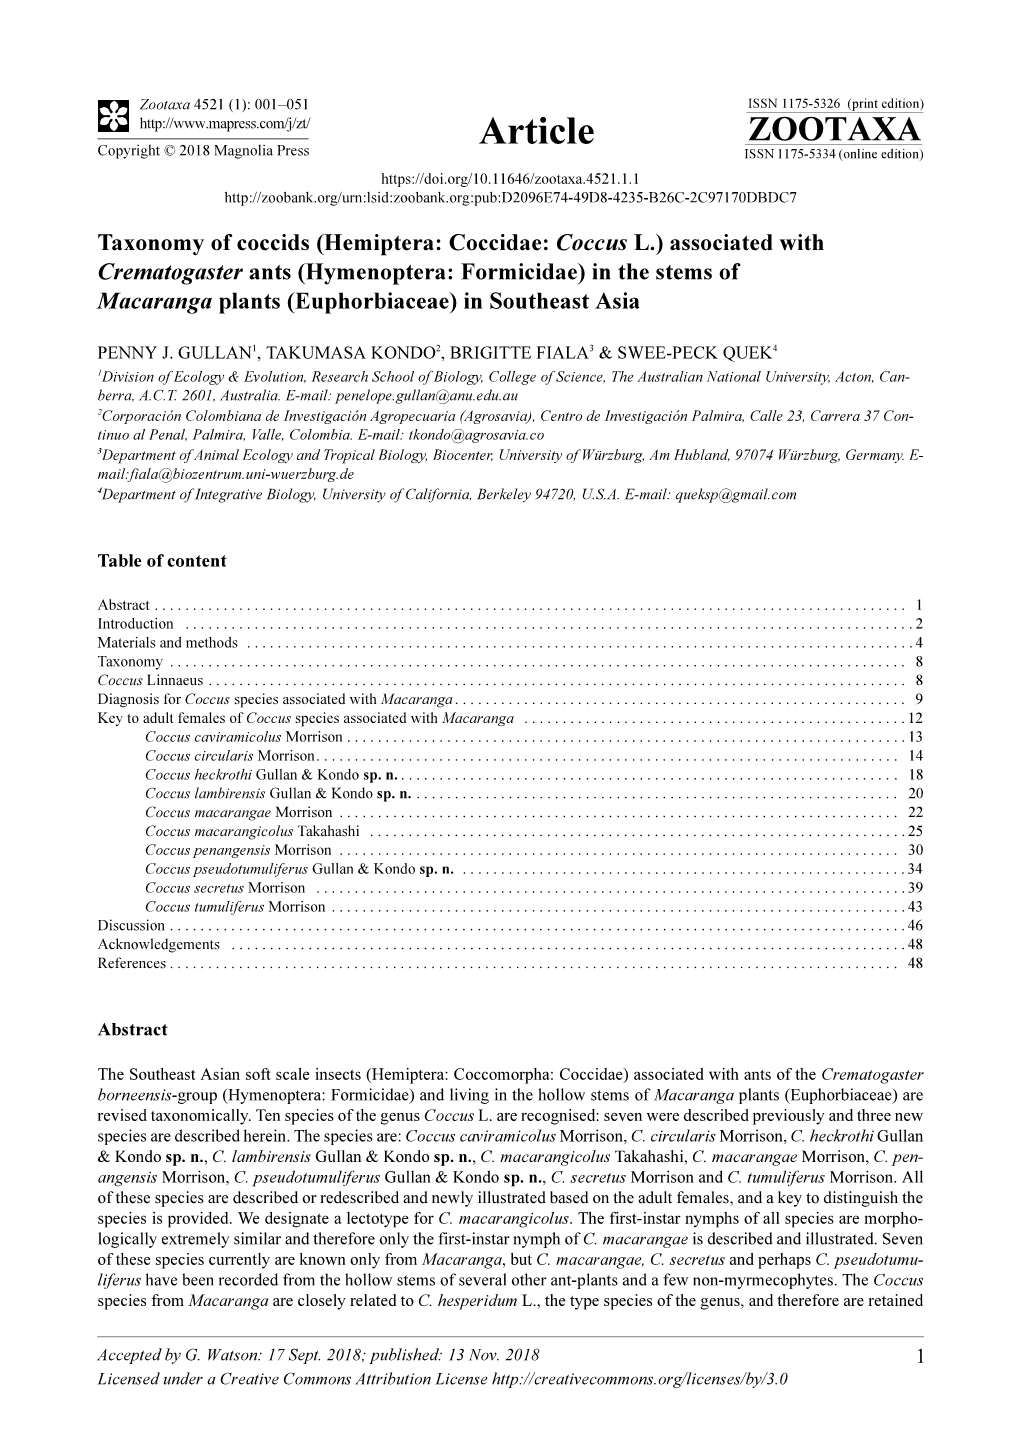 Taxonomy of Coccids (Hemiptera: Coccidae: Coccus L.) Associated with Crematogaster Ants (Hymenoptera: Formicidae) in the Stems O